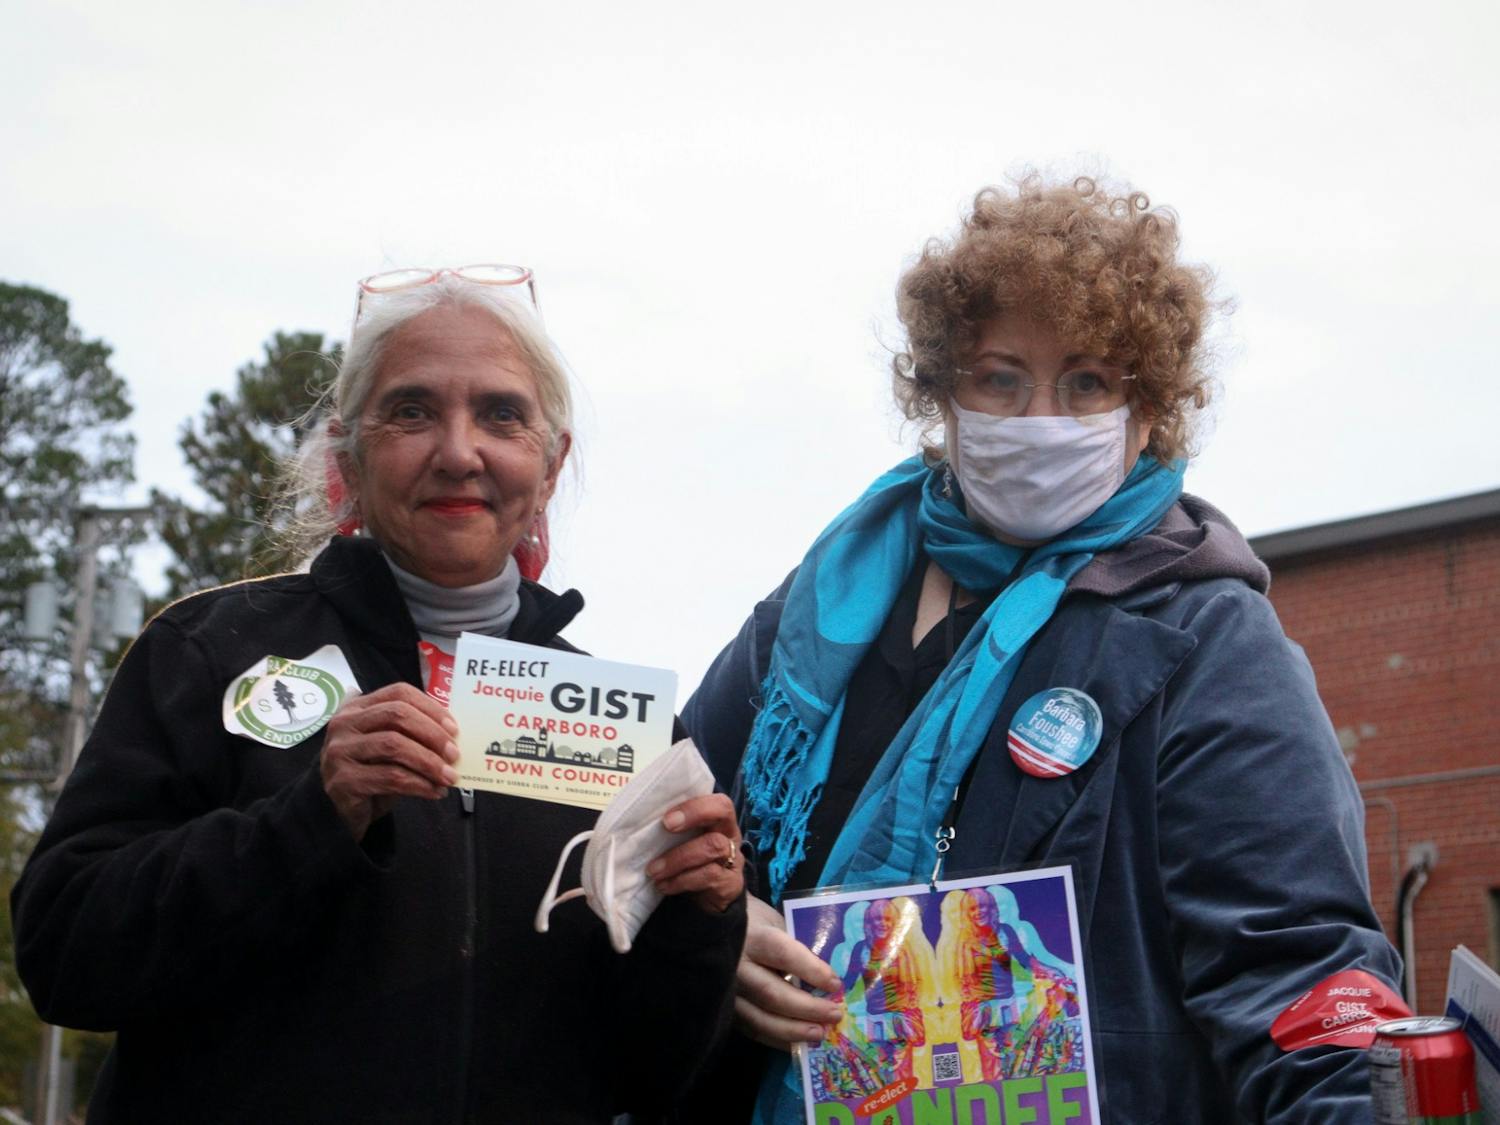 Former Carrboro Town Council member Jacquelyn Gist (left) and Carrboro resident Jacqueline Marx campaign outside Carrboro Town Hall on Nov. 2, 2021.